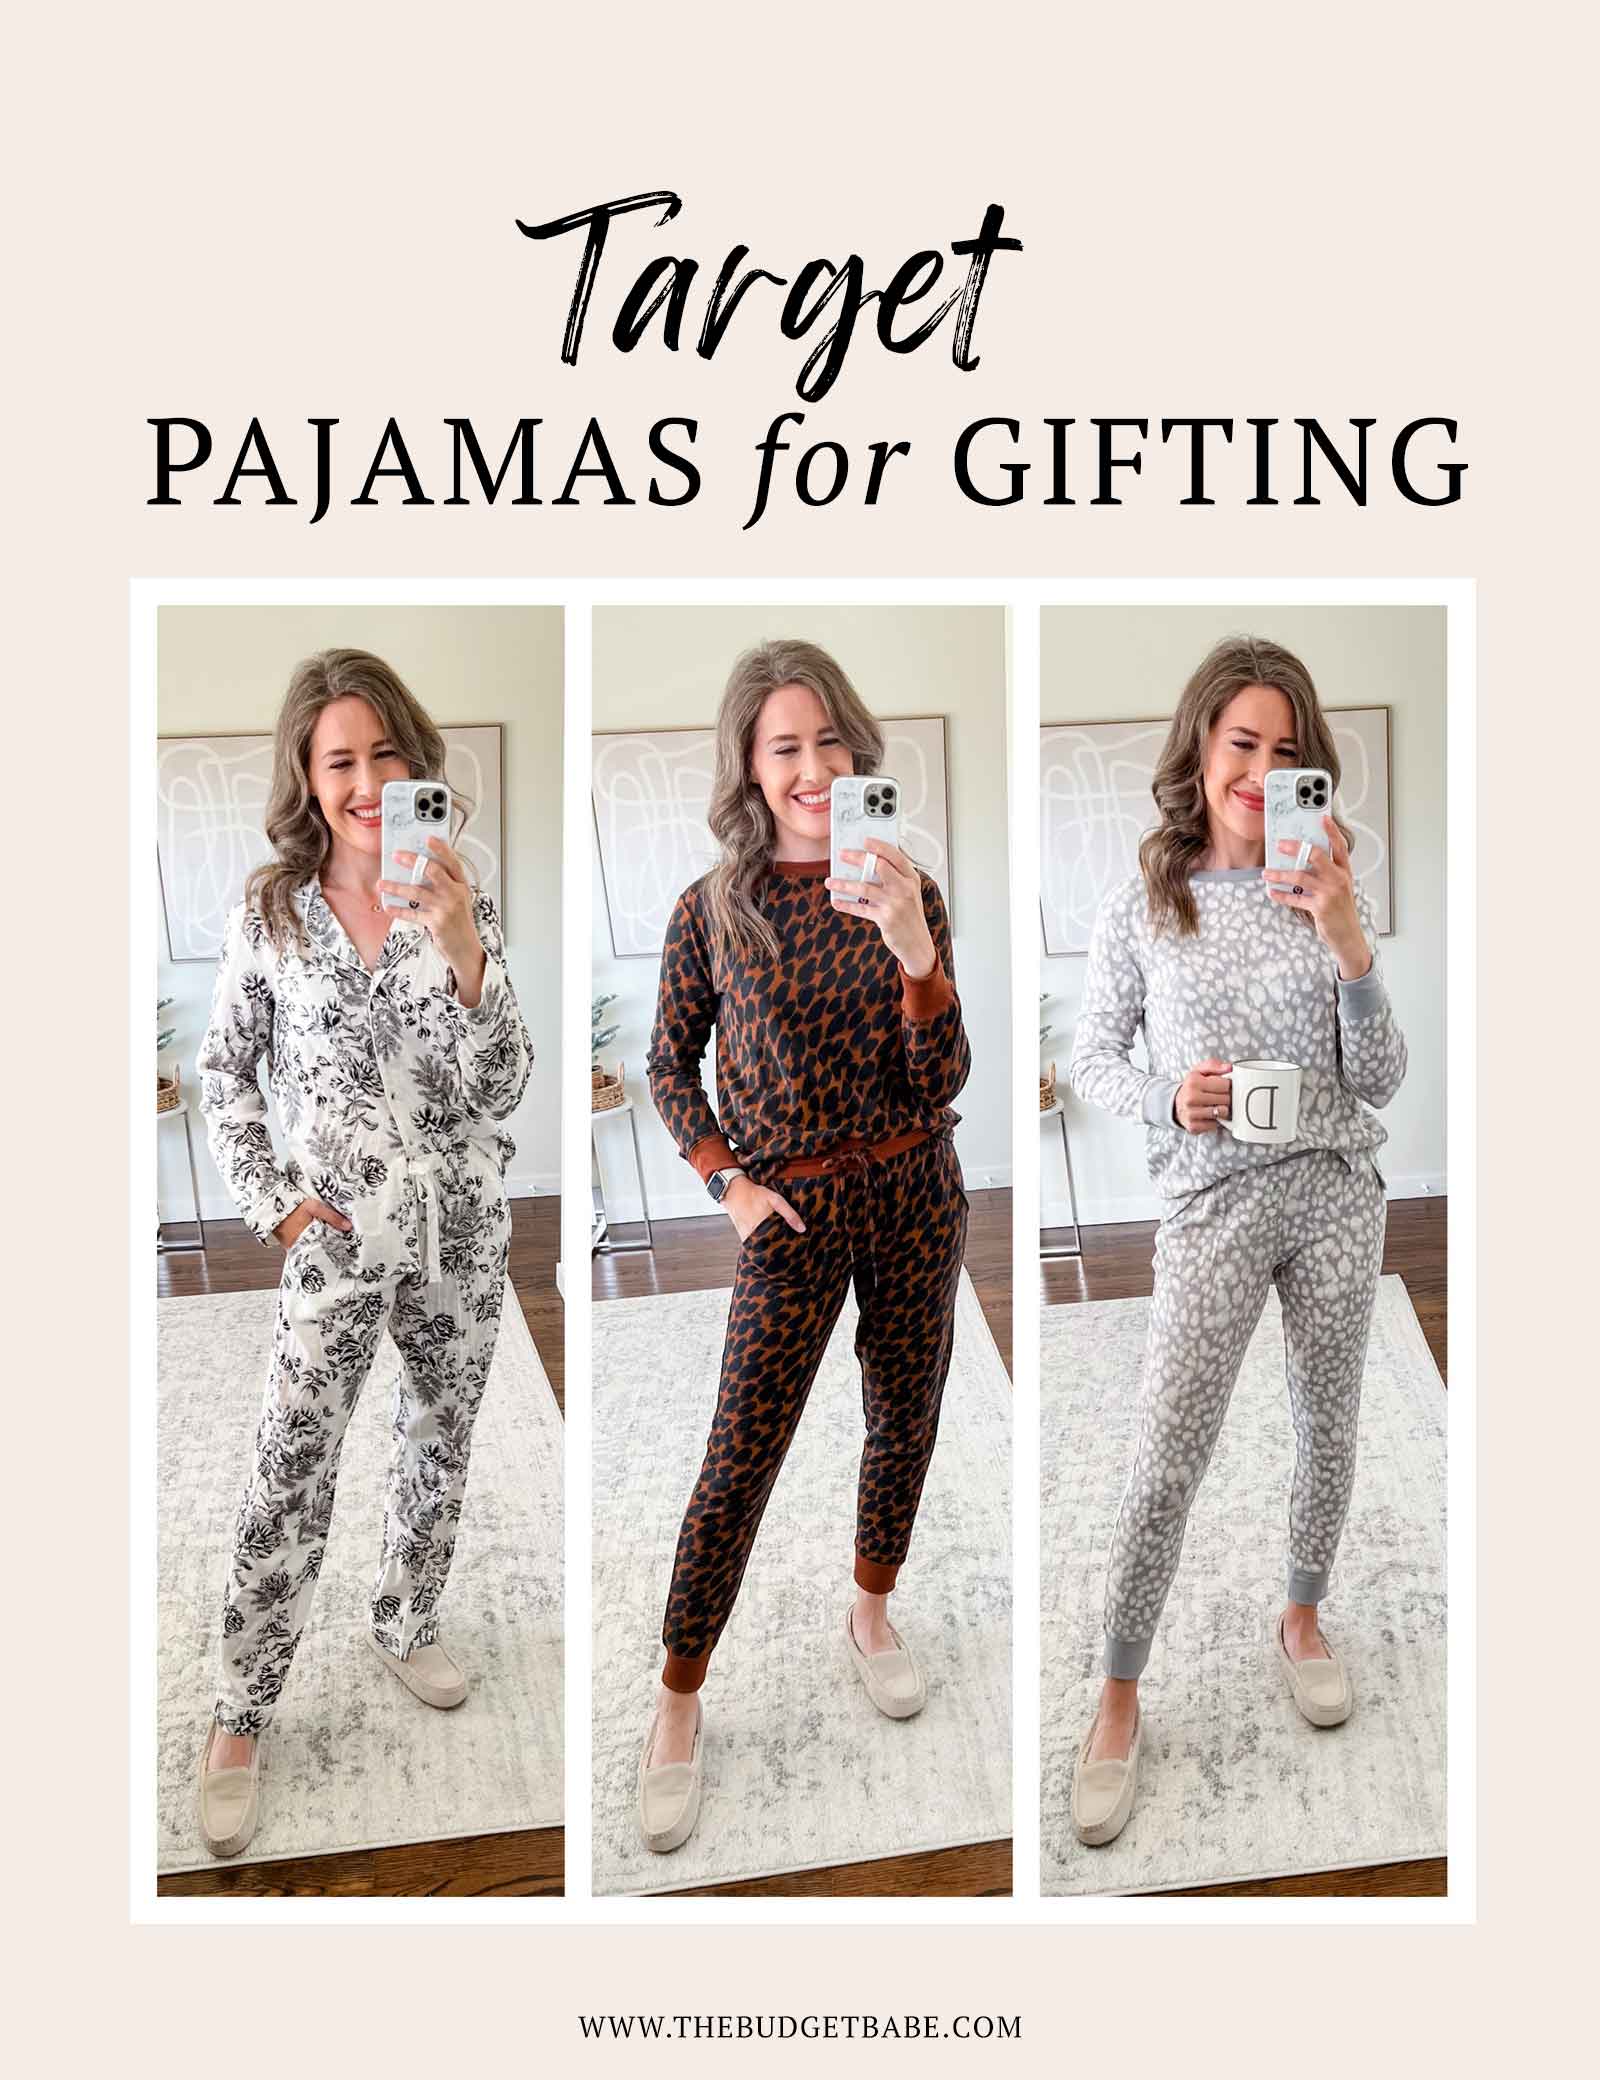 Target pajamas that are perfect for holiday gifting!